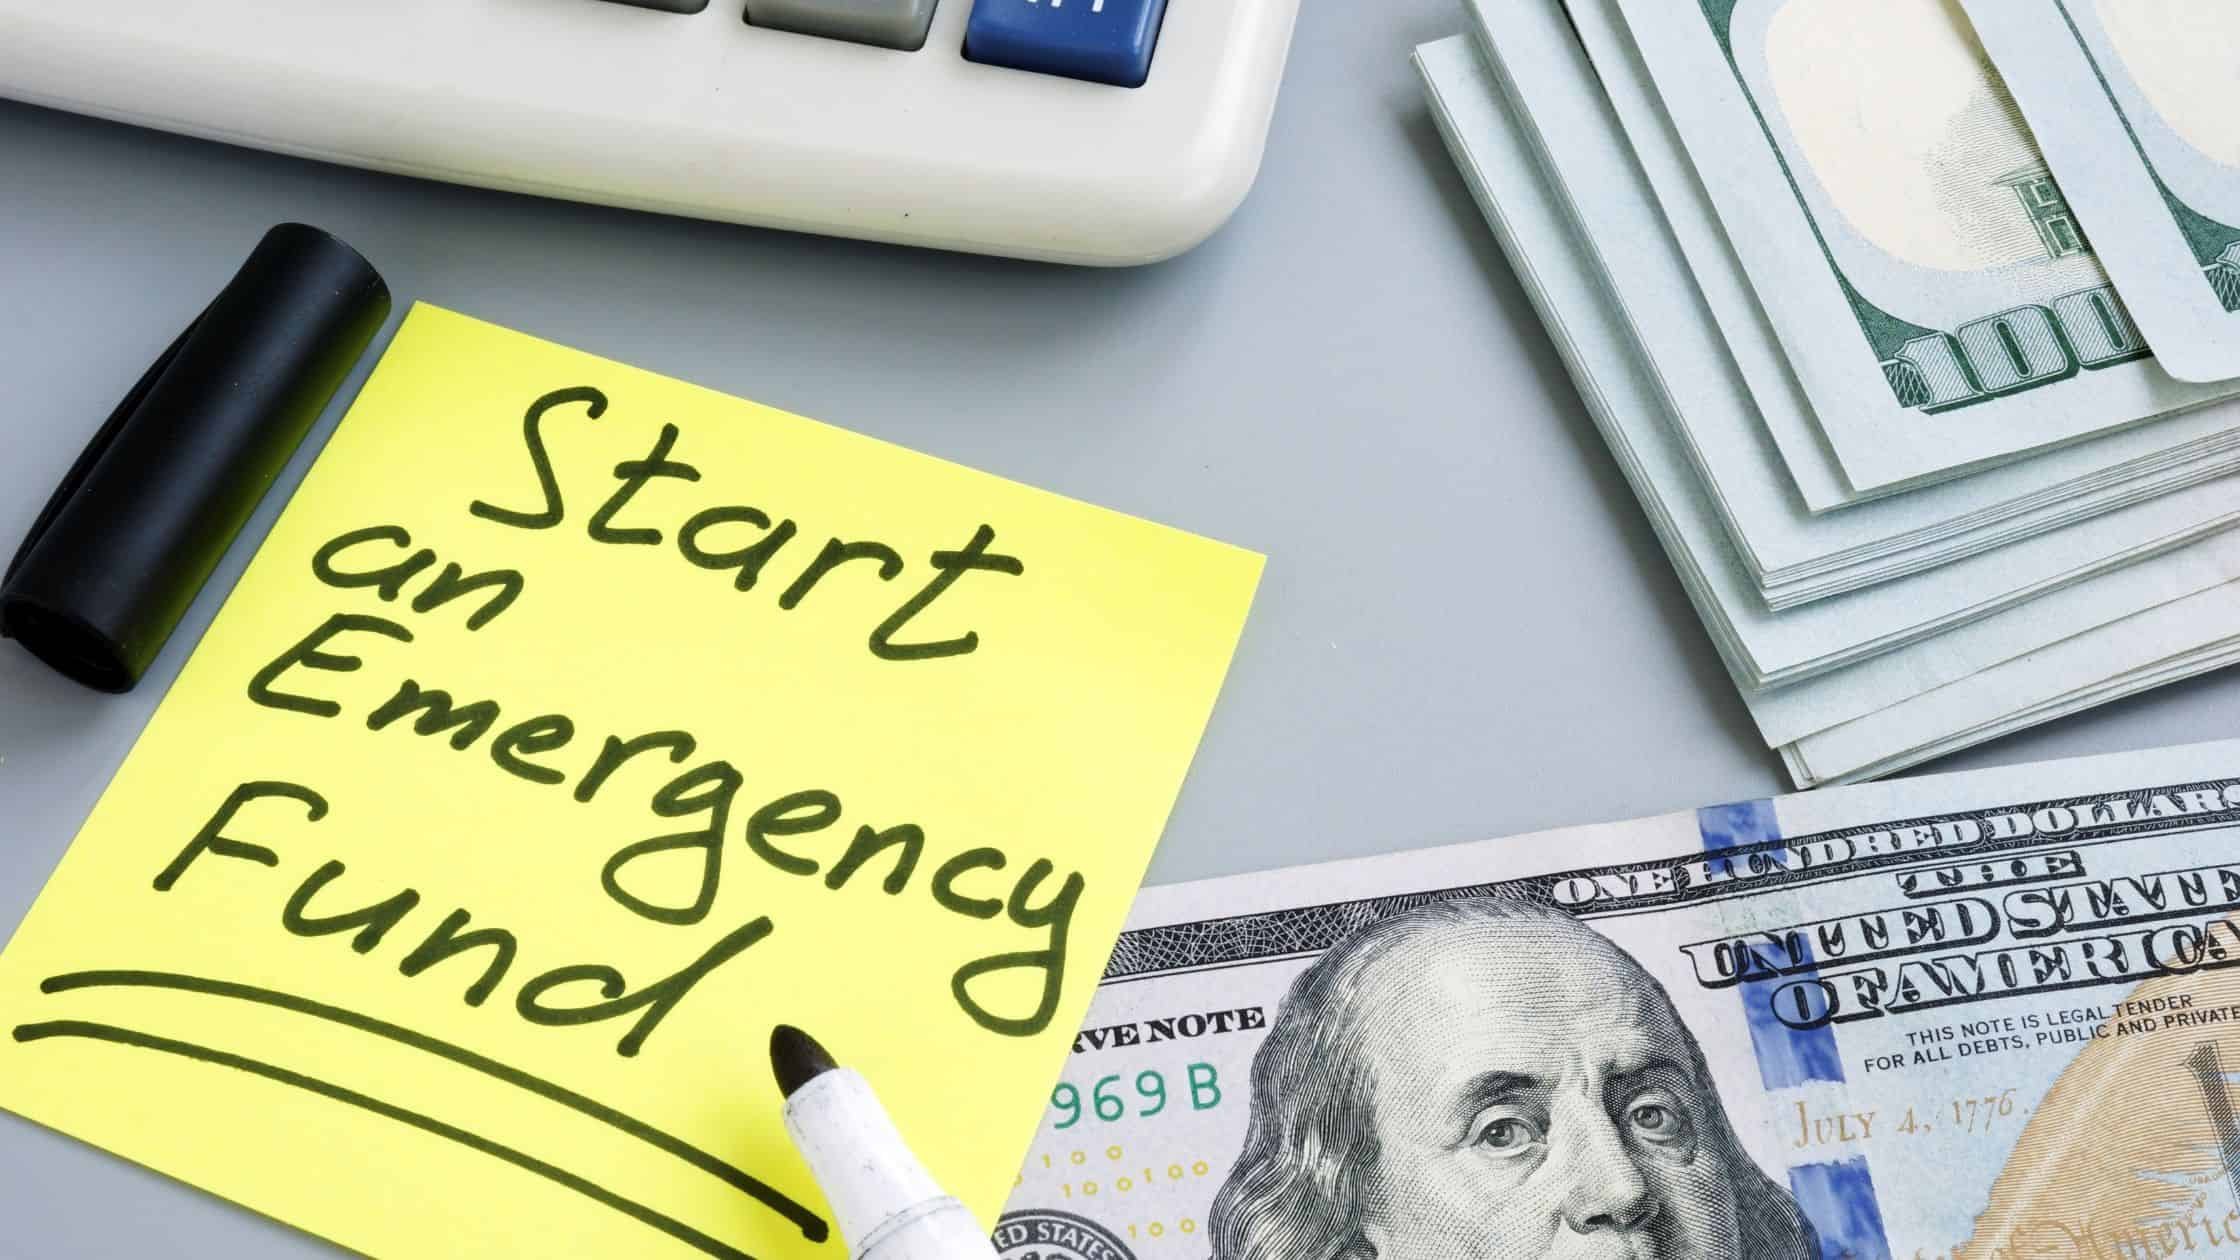 Tired of enduring a toxic boss? Equip yourself with a 3-month emergency fund and unlock the freedom to seek a better job environment. Here's how to get started.